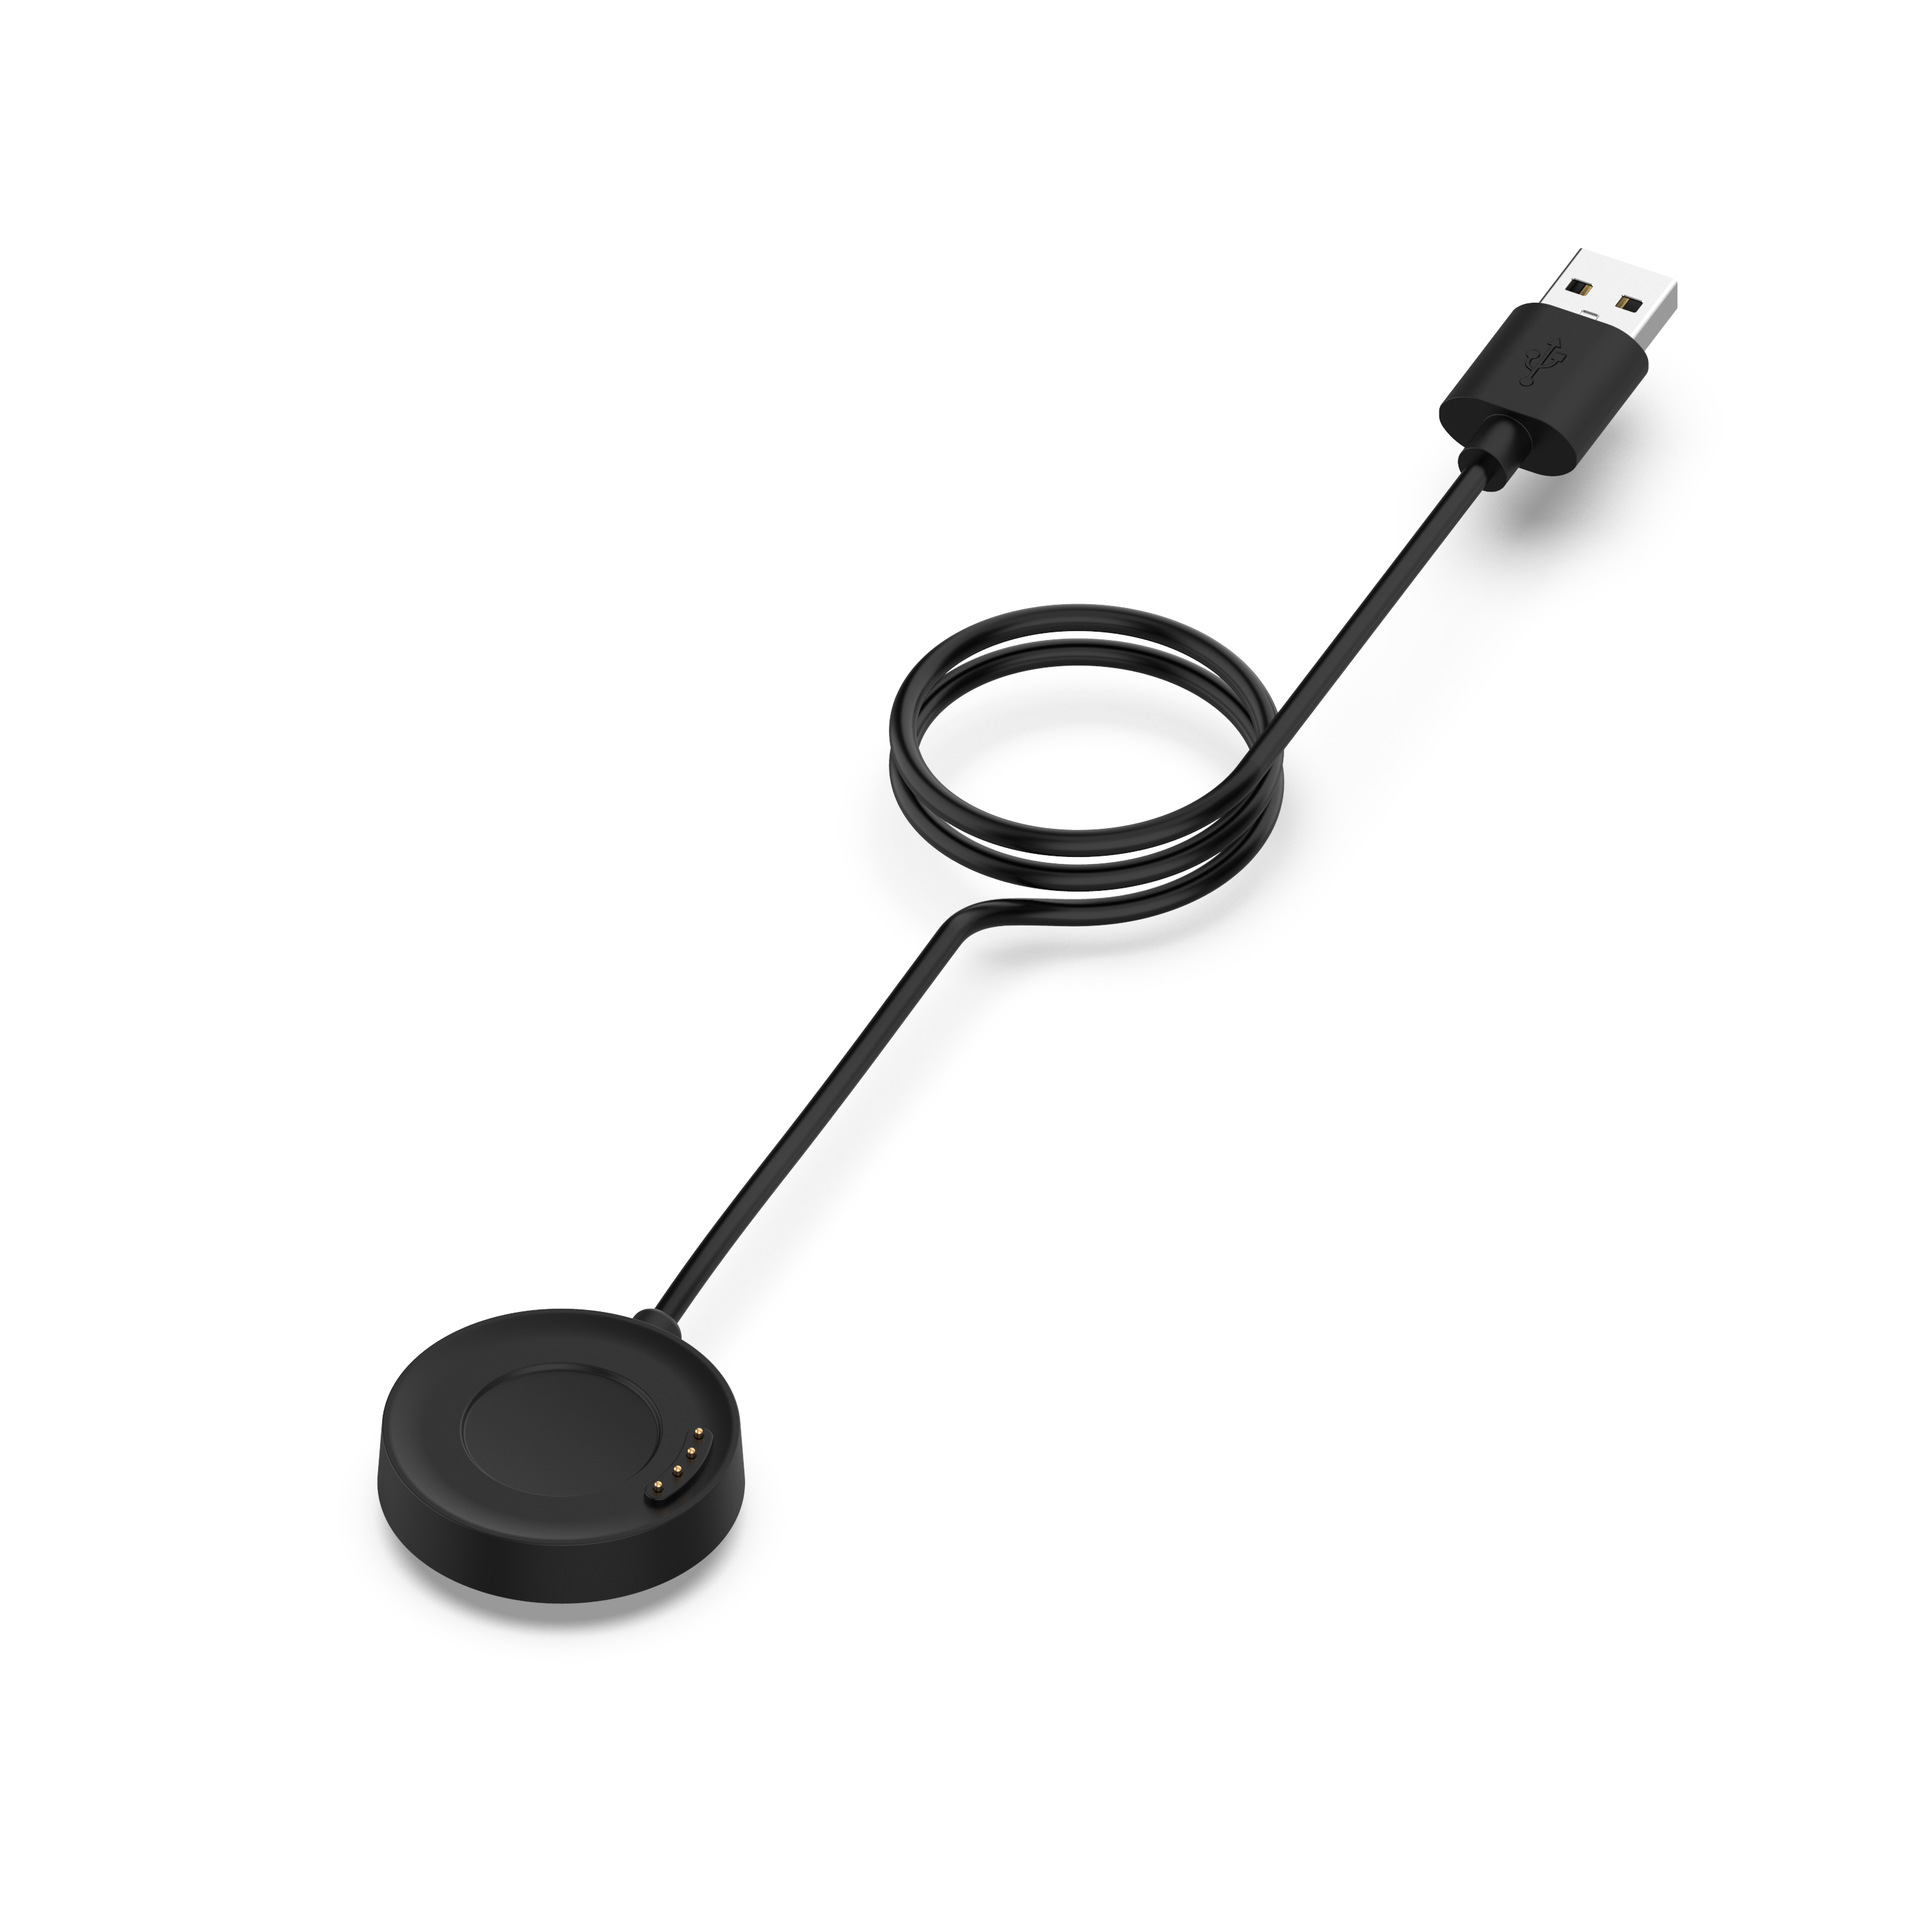 Bakeey-1M-TPU-Watch-Cable-Magnetic-Charger-Cable-for-Amazfit-stratos-3-Smart-Watch-Non-original-1621669-3